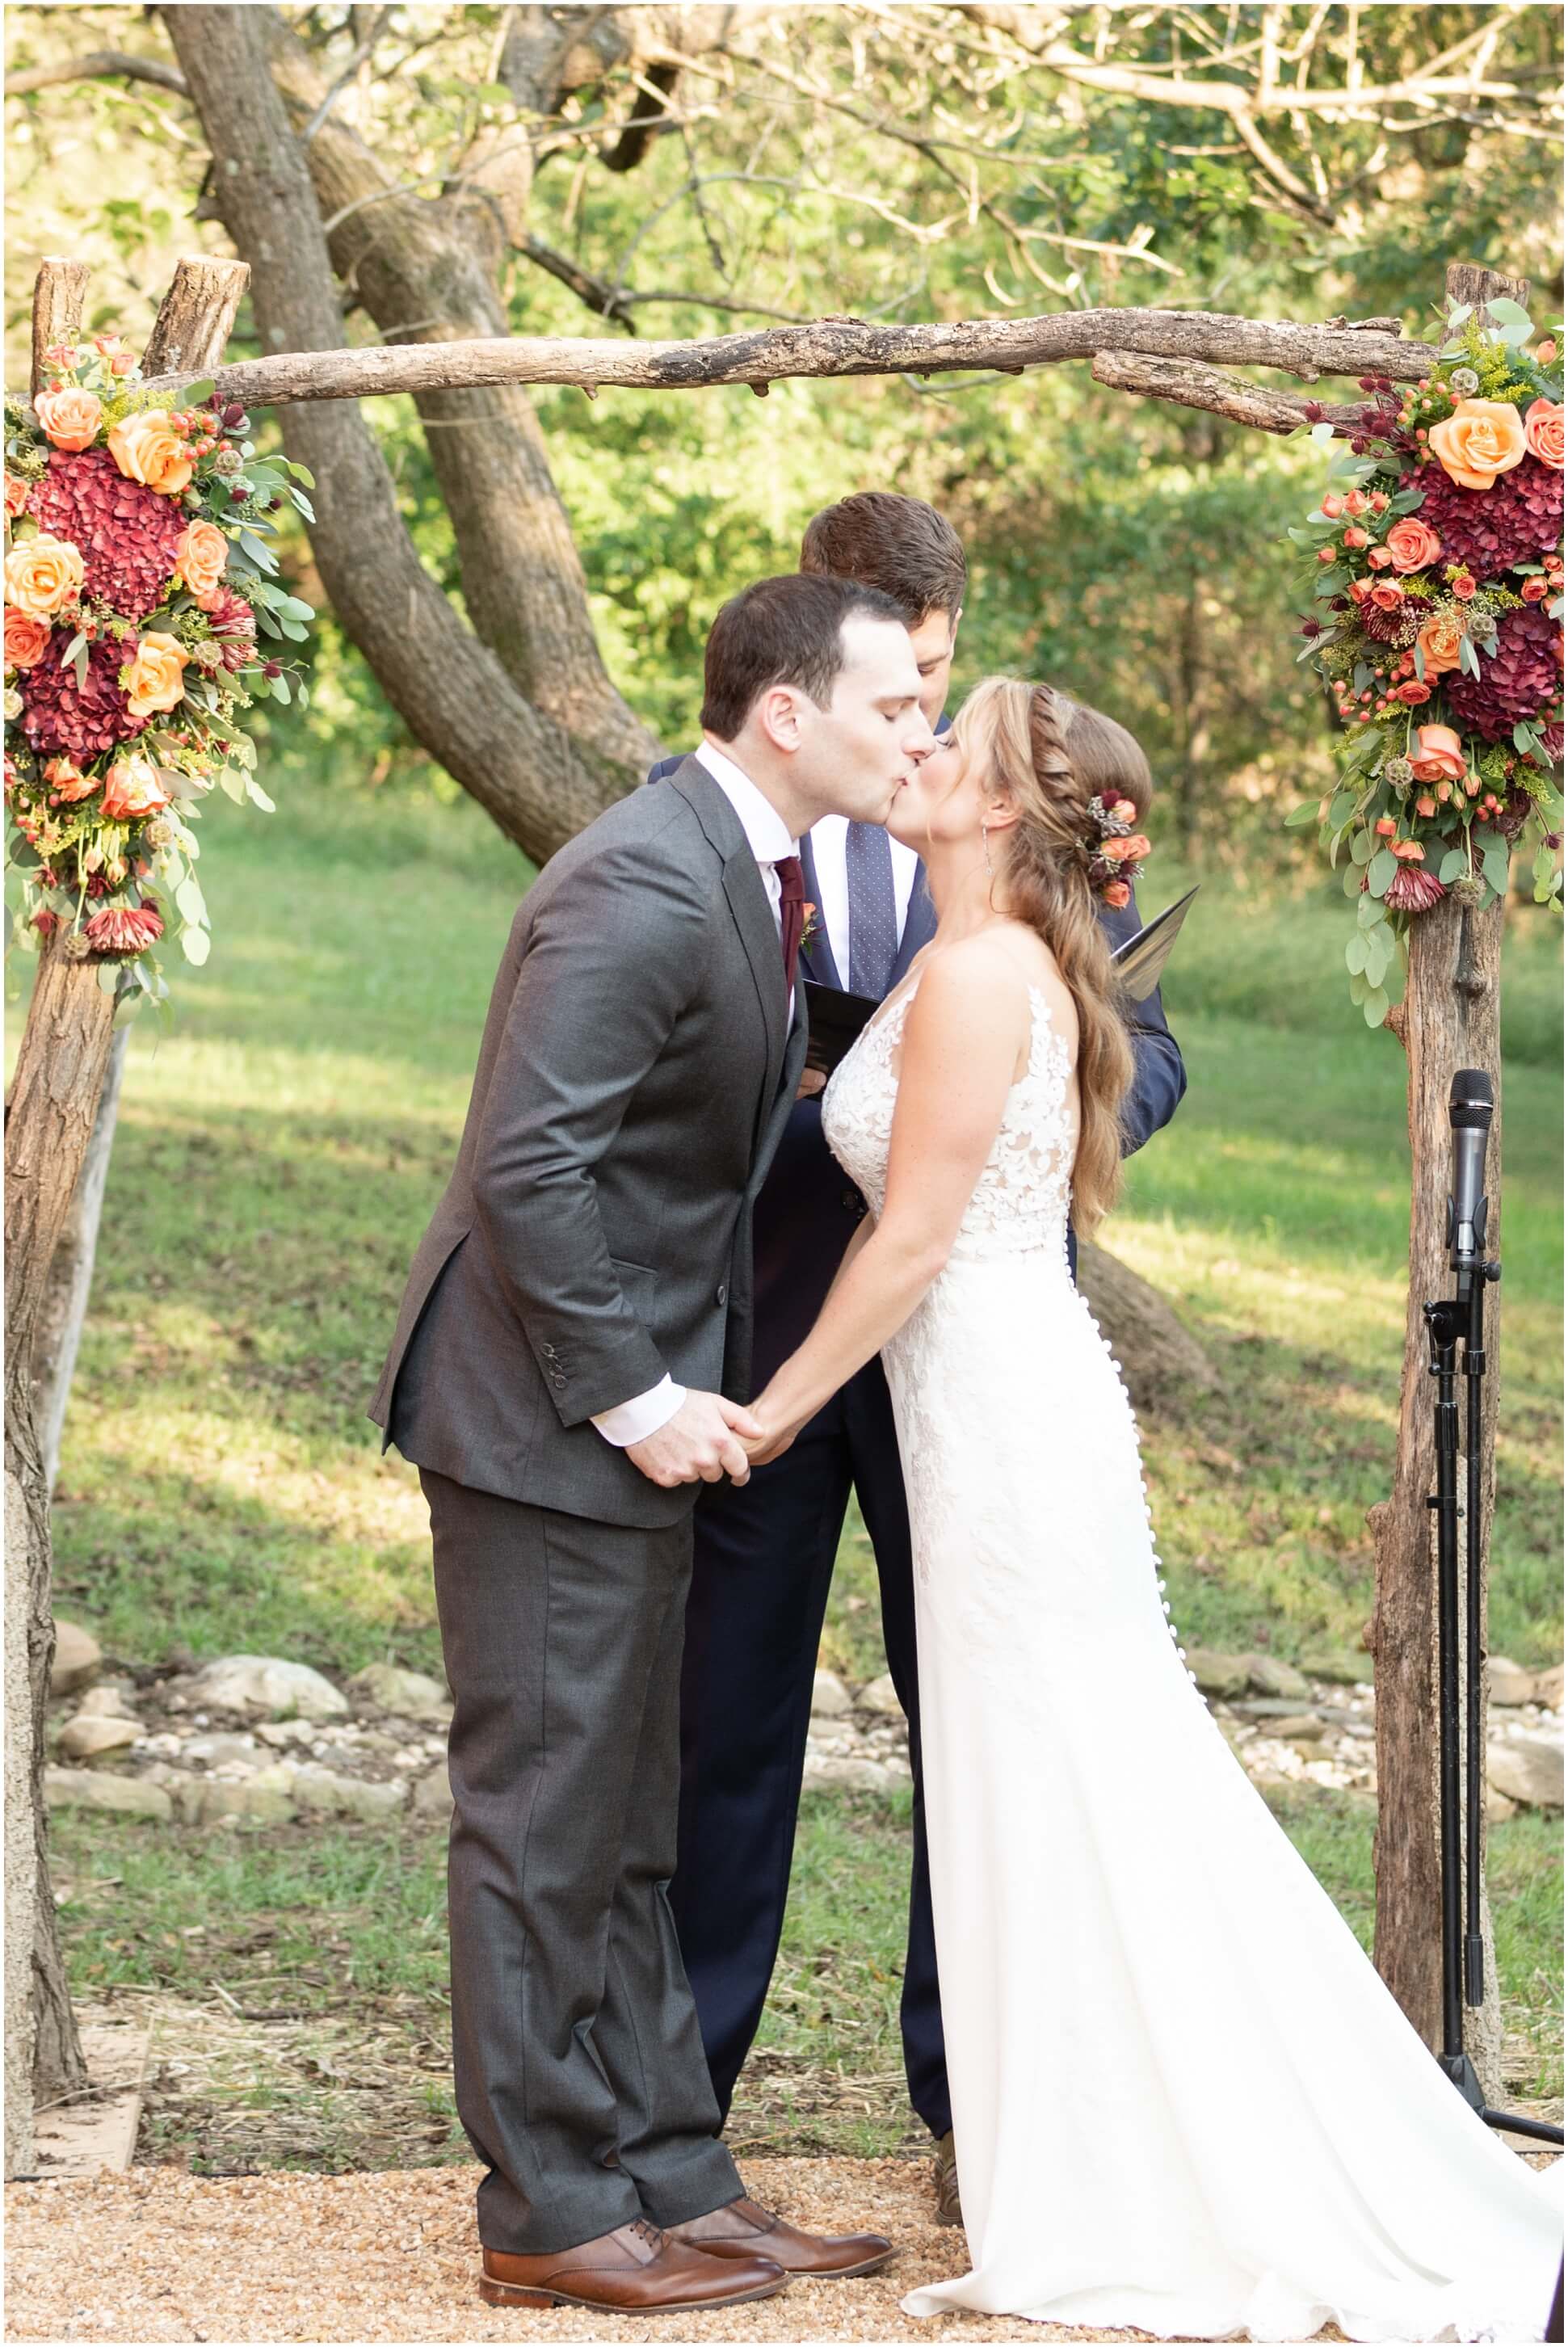 THE KISS AT THE CEREMONY